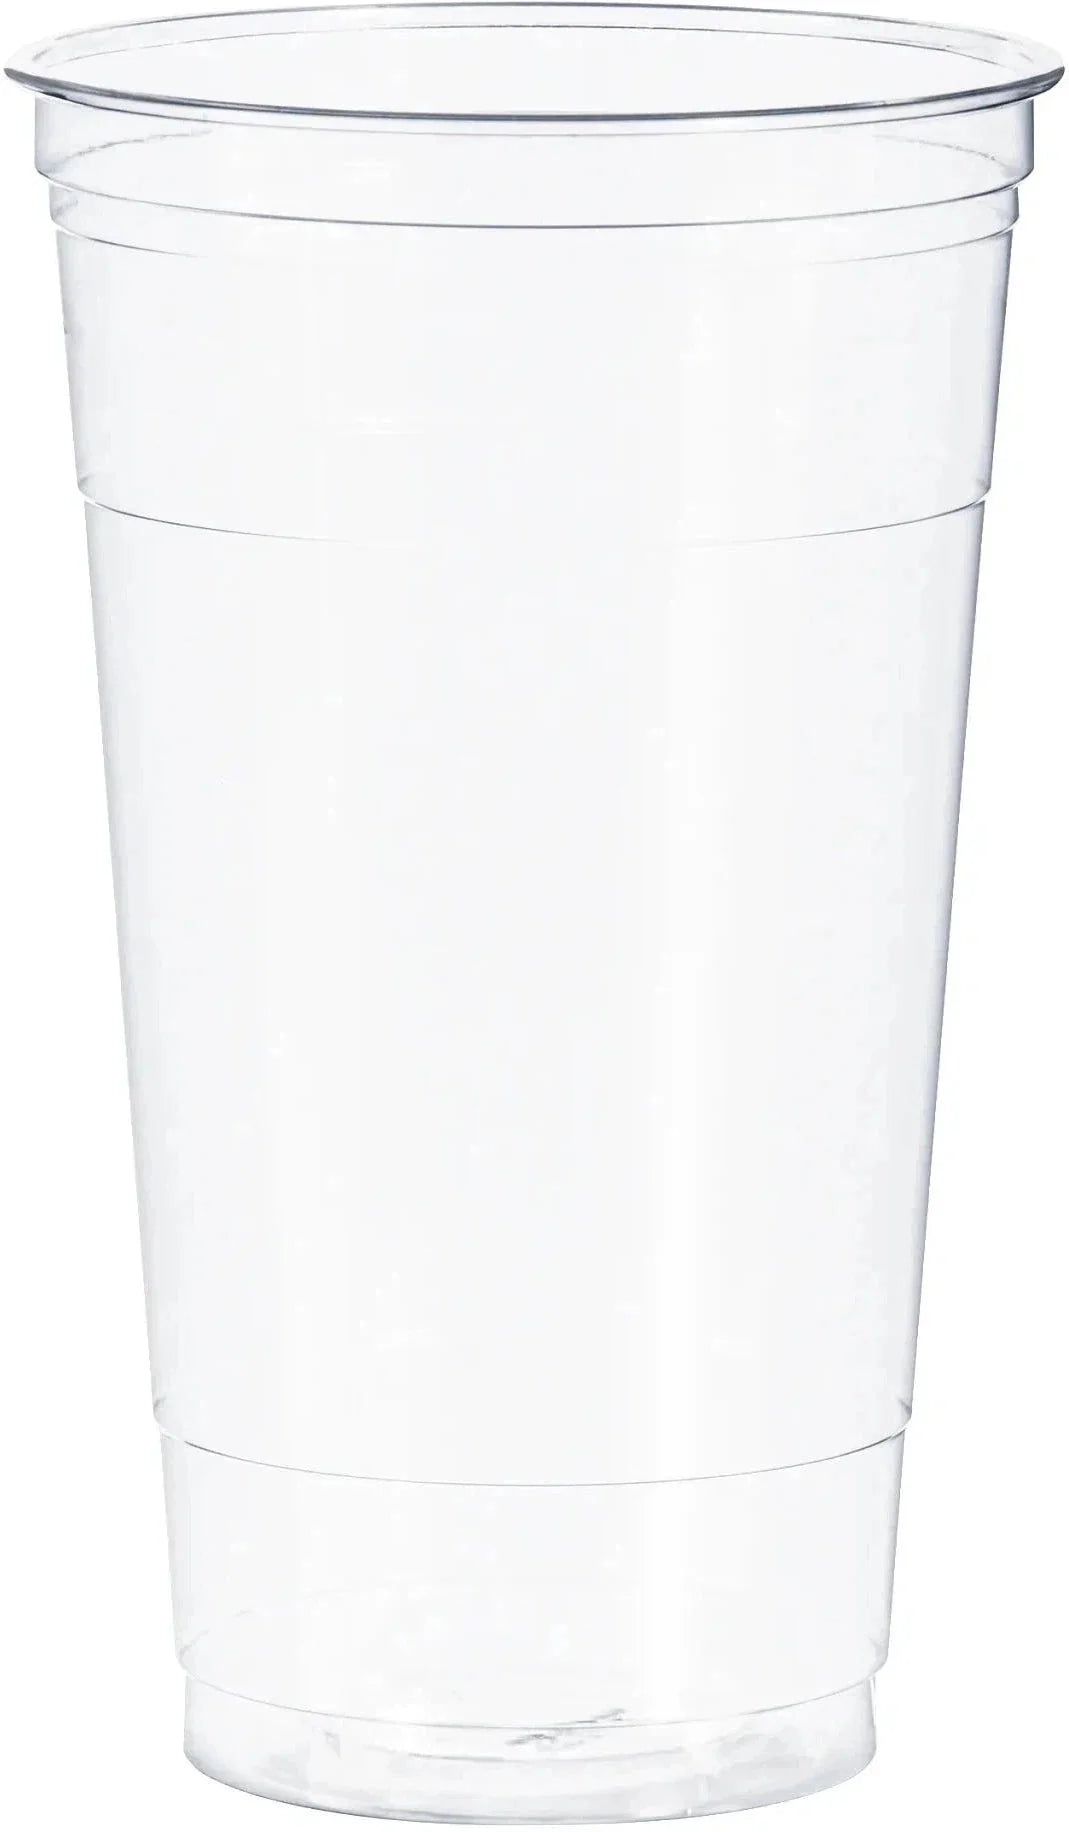 Dart Container - 32 Oz Clear Straight Wall Plastic Cups PET, 300/Cs - TC32